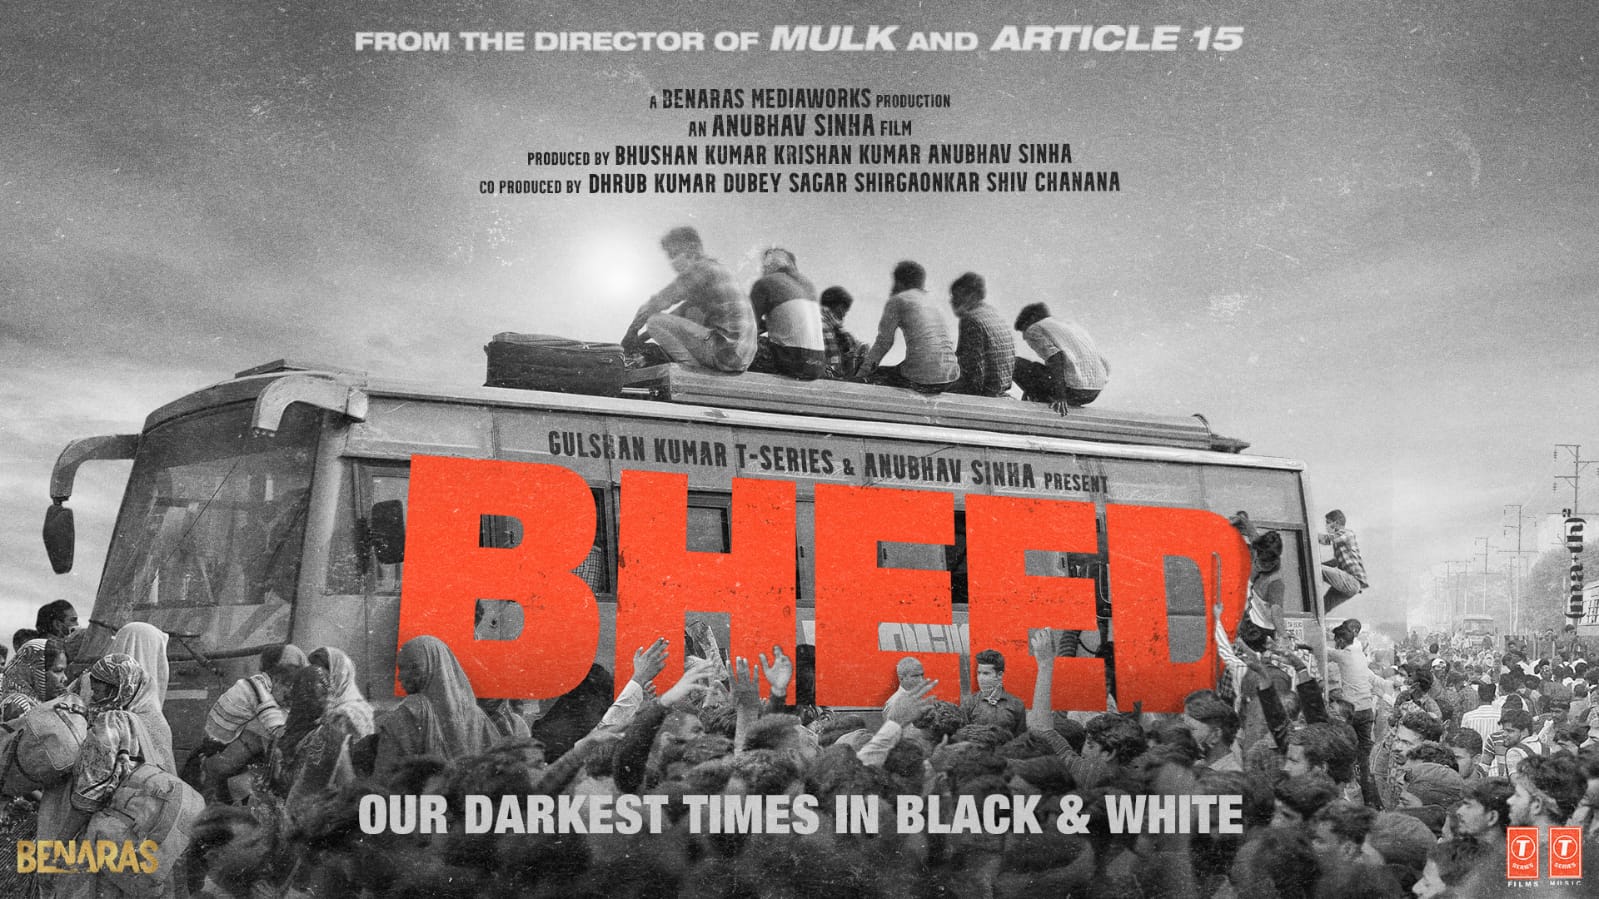 ‘Bheed’, shot in Black & White,  will offer different shades from the 2020 India Lockdown!